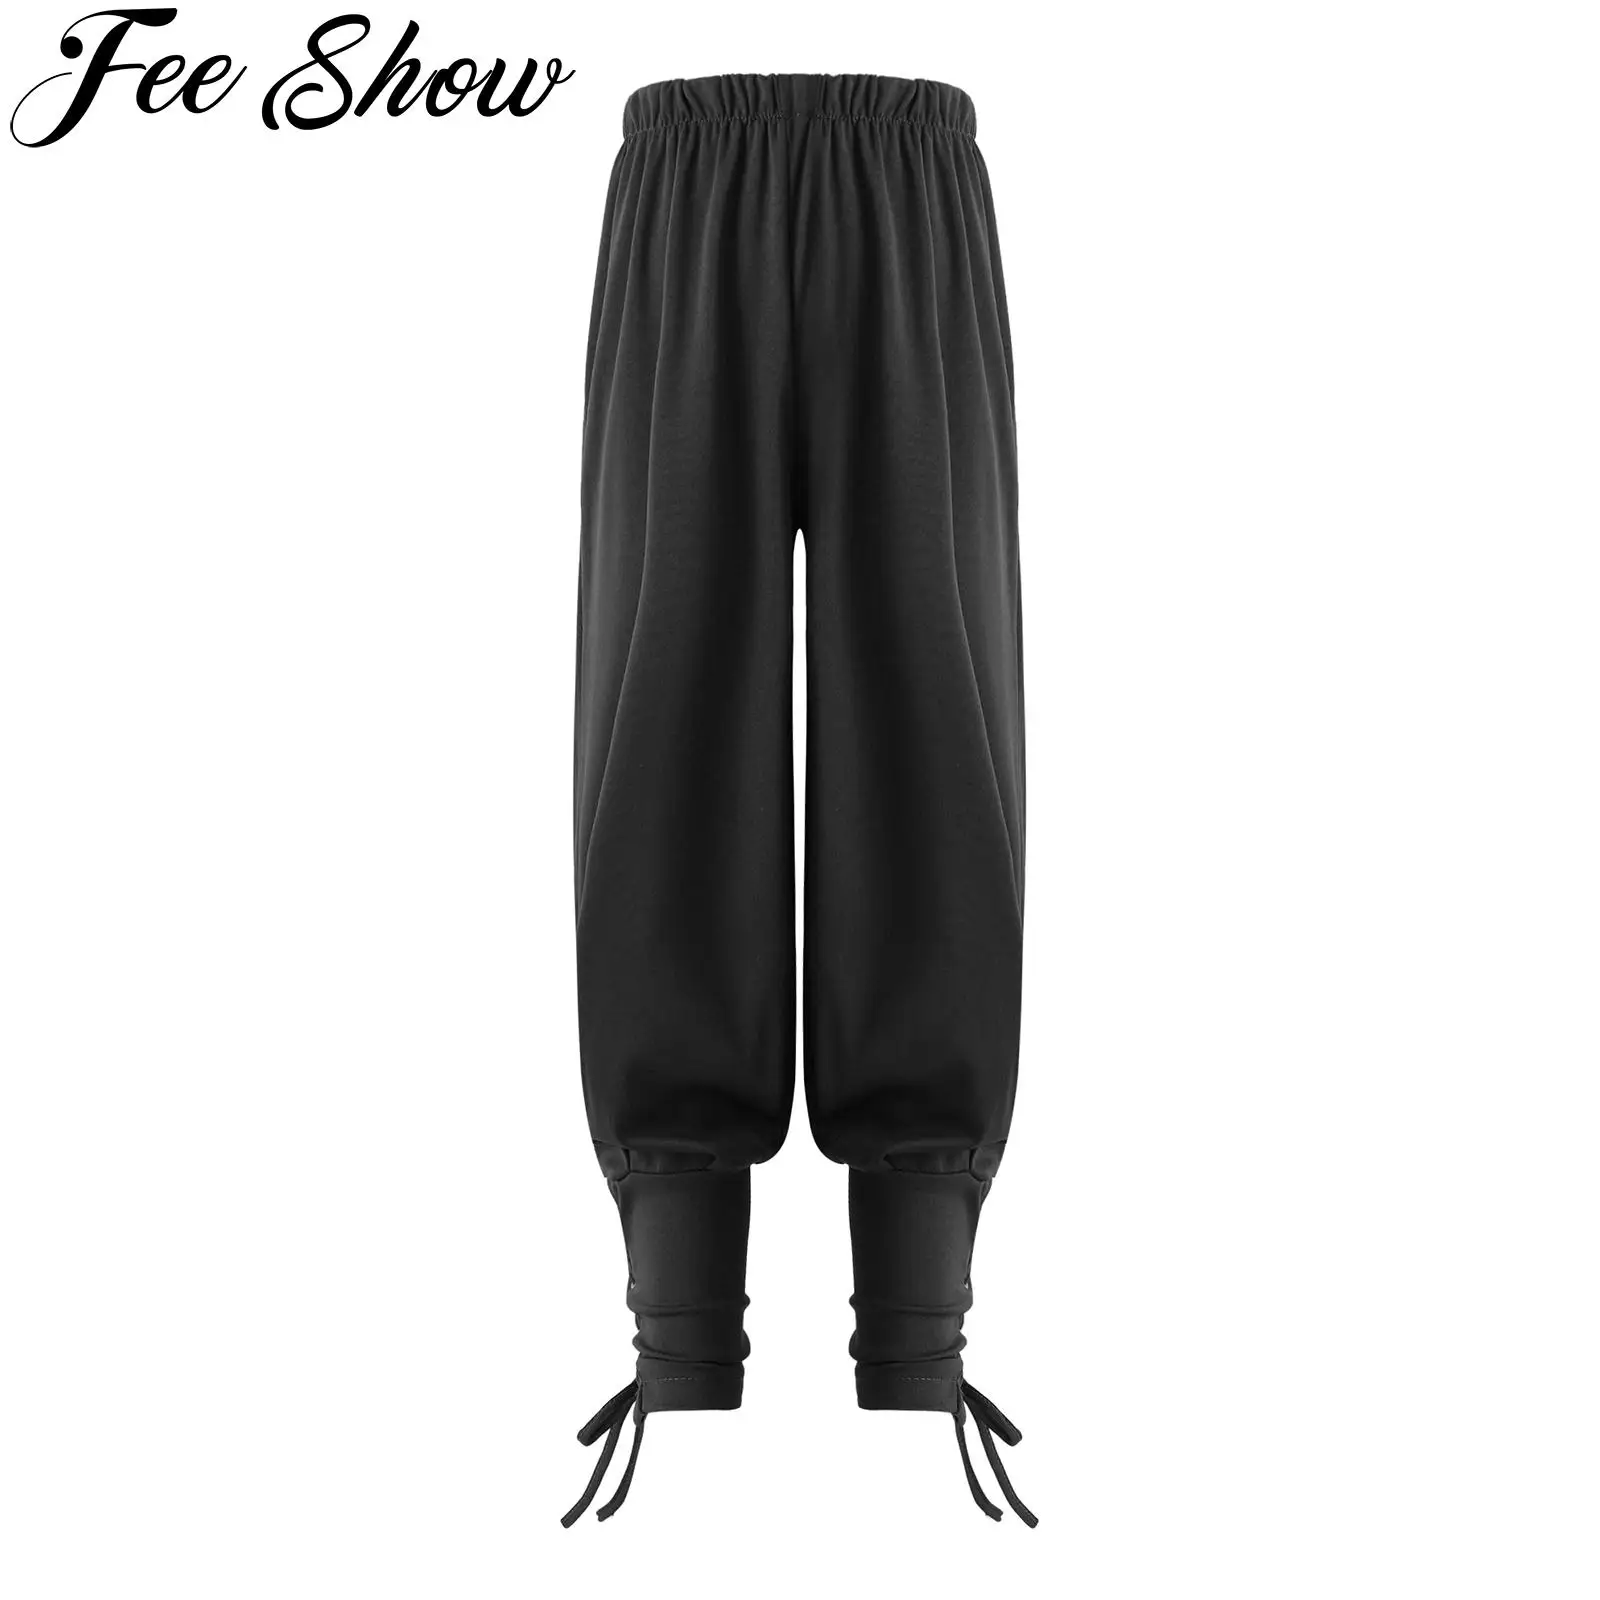 

Kids Boys Medieval Ankle Banded Pirate Pants Renaissance Victoria Viking Costume Pants Halloween Cosplay Gothic Striped Trousers